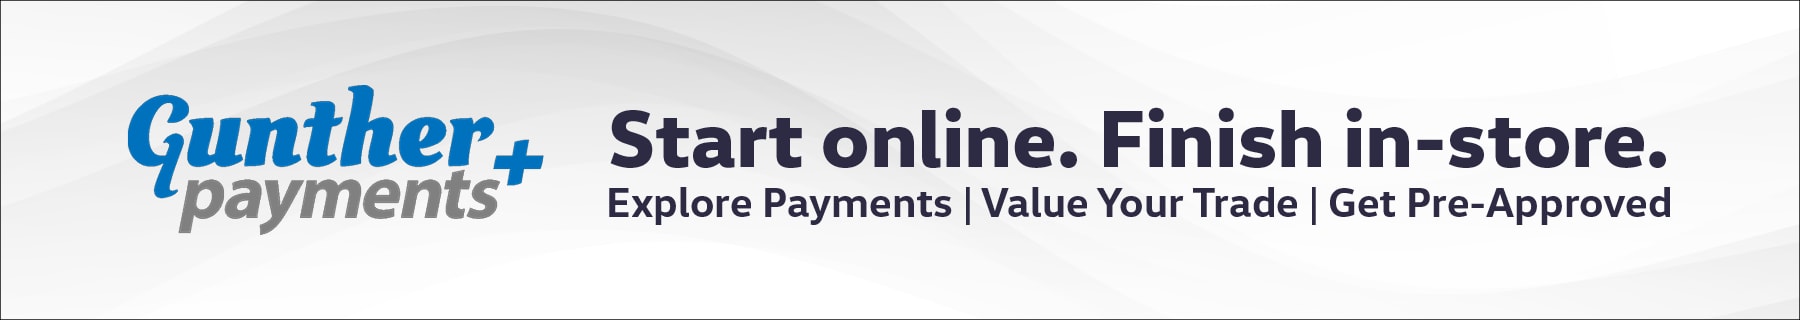 Gunther Payments Plus. Start online. Finish in-store. Explore payments, value your trade, get pre-approved.